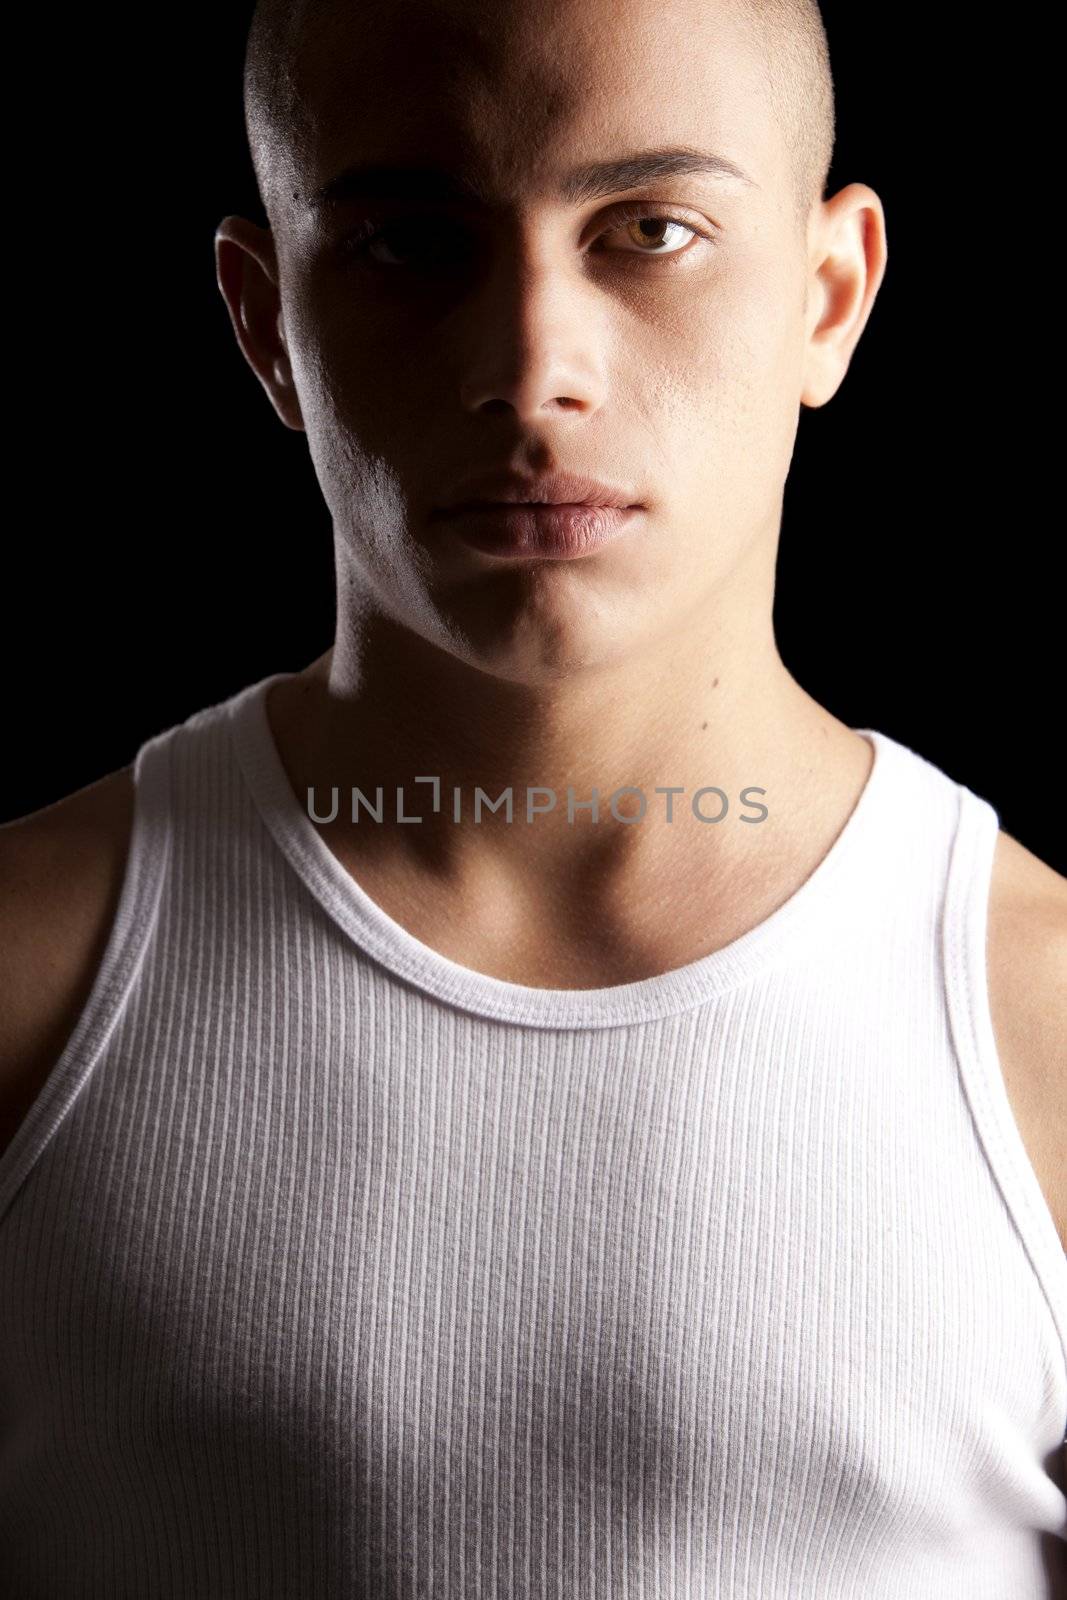 A good looking, muscular built, man on a black background.